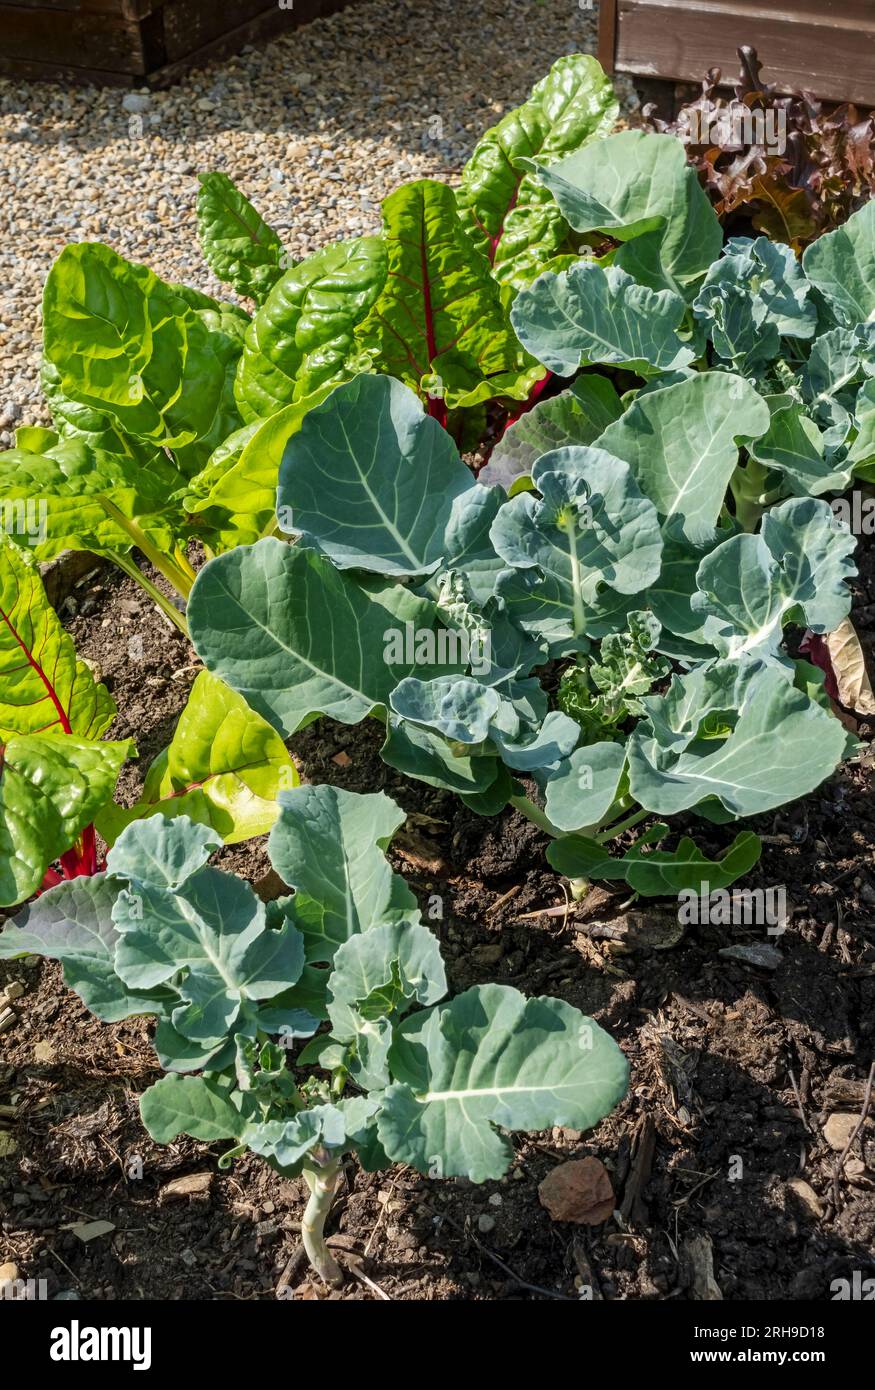 Close of of calabrese and chard plants crop growing on an allotment vegetables vegetable garden in summer England UK United Kingdom GB Great Britain Stock Photo